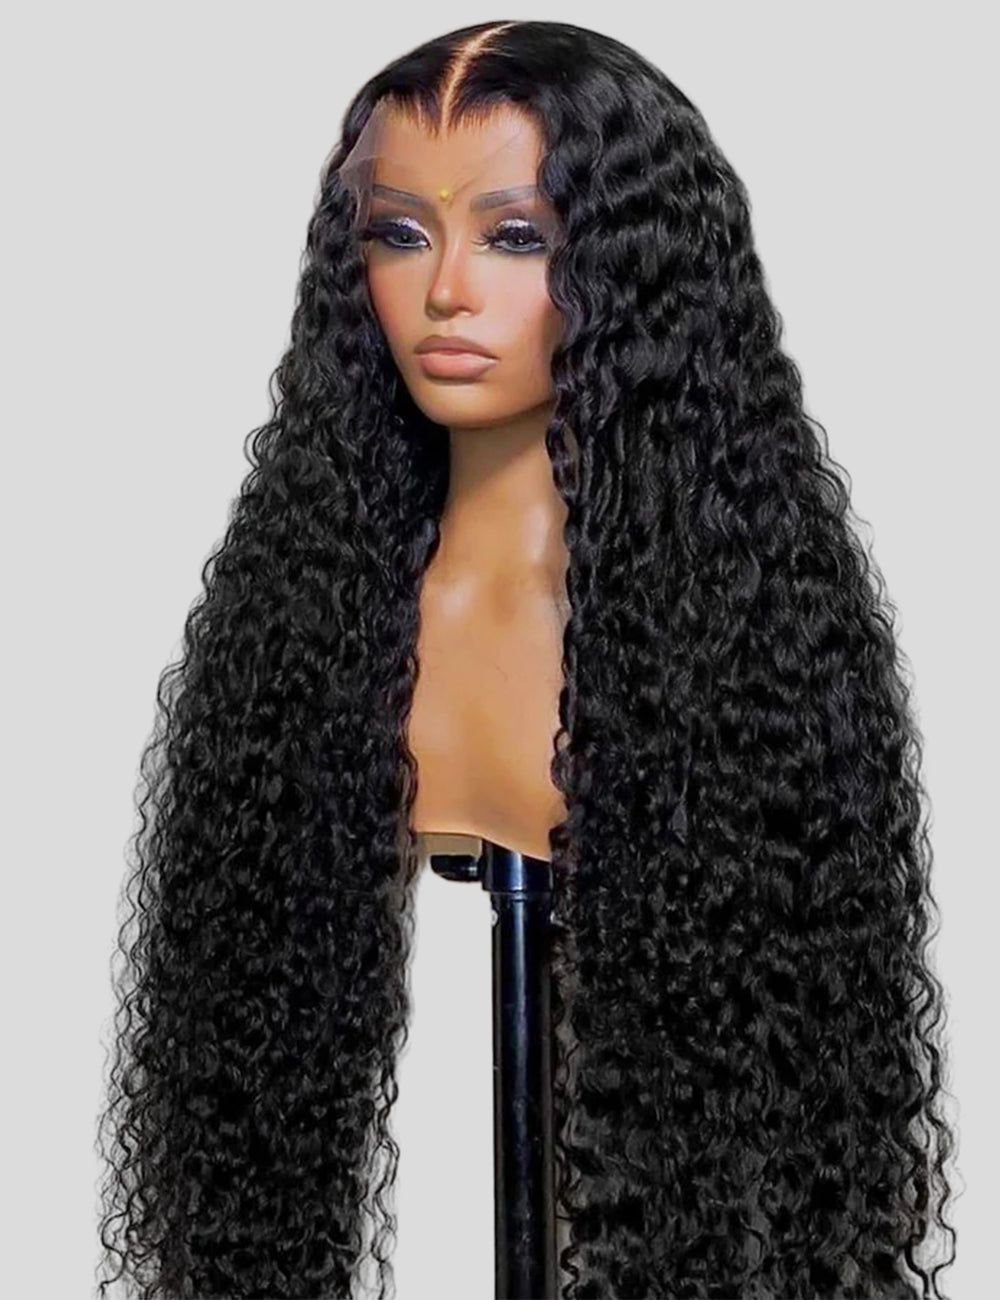 Full Lace Wigs Deep Wave Human Hair Wigs Breathable 360 Full Lace Wigs Pre Plucked